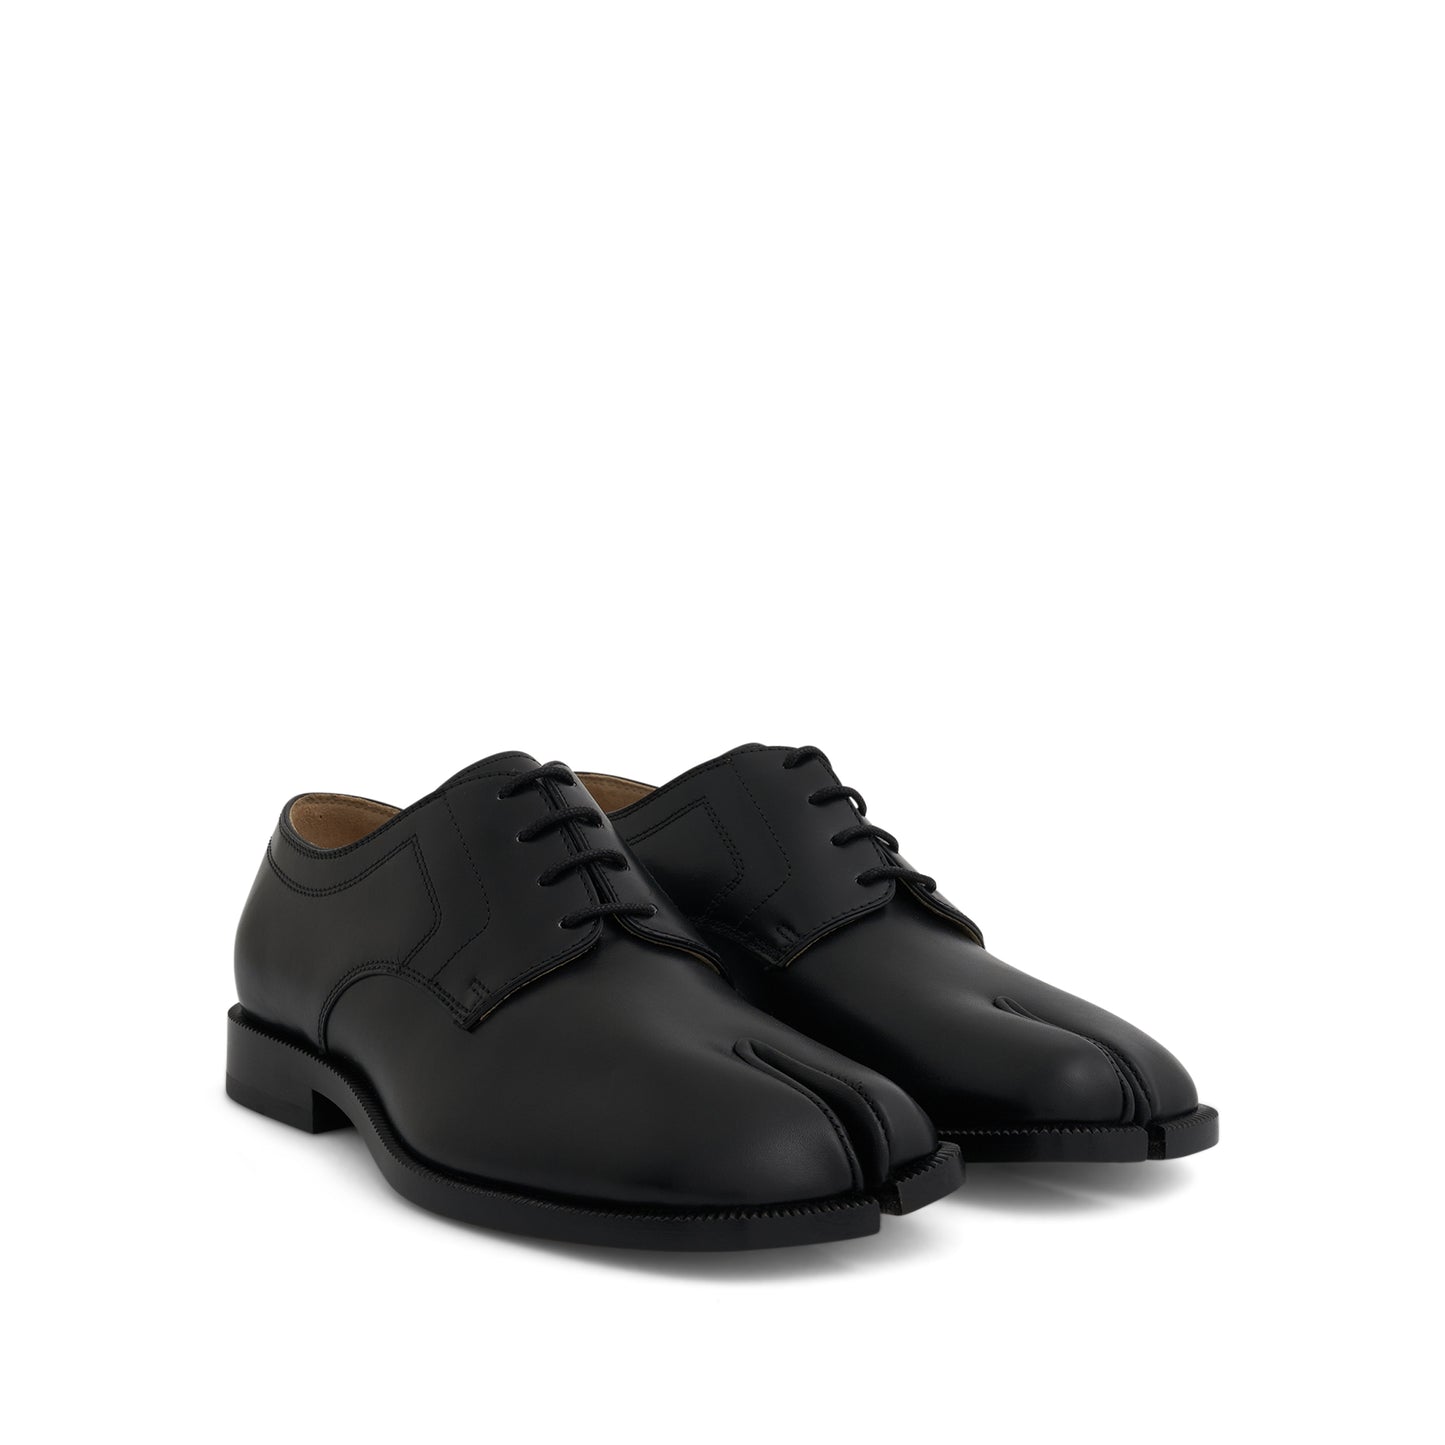 Tabi Lace-ups Shoes in Black